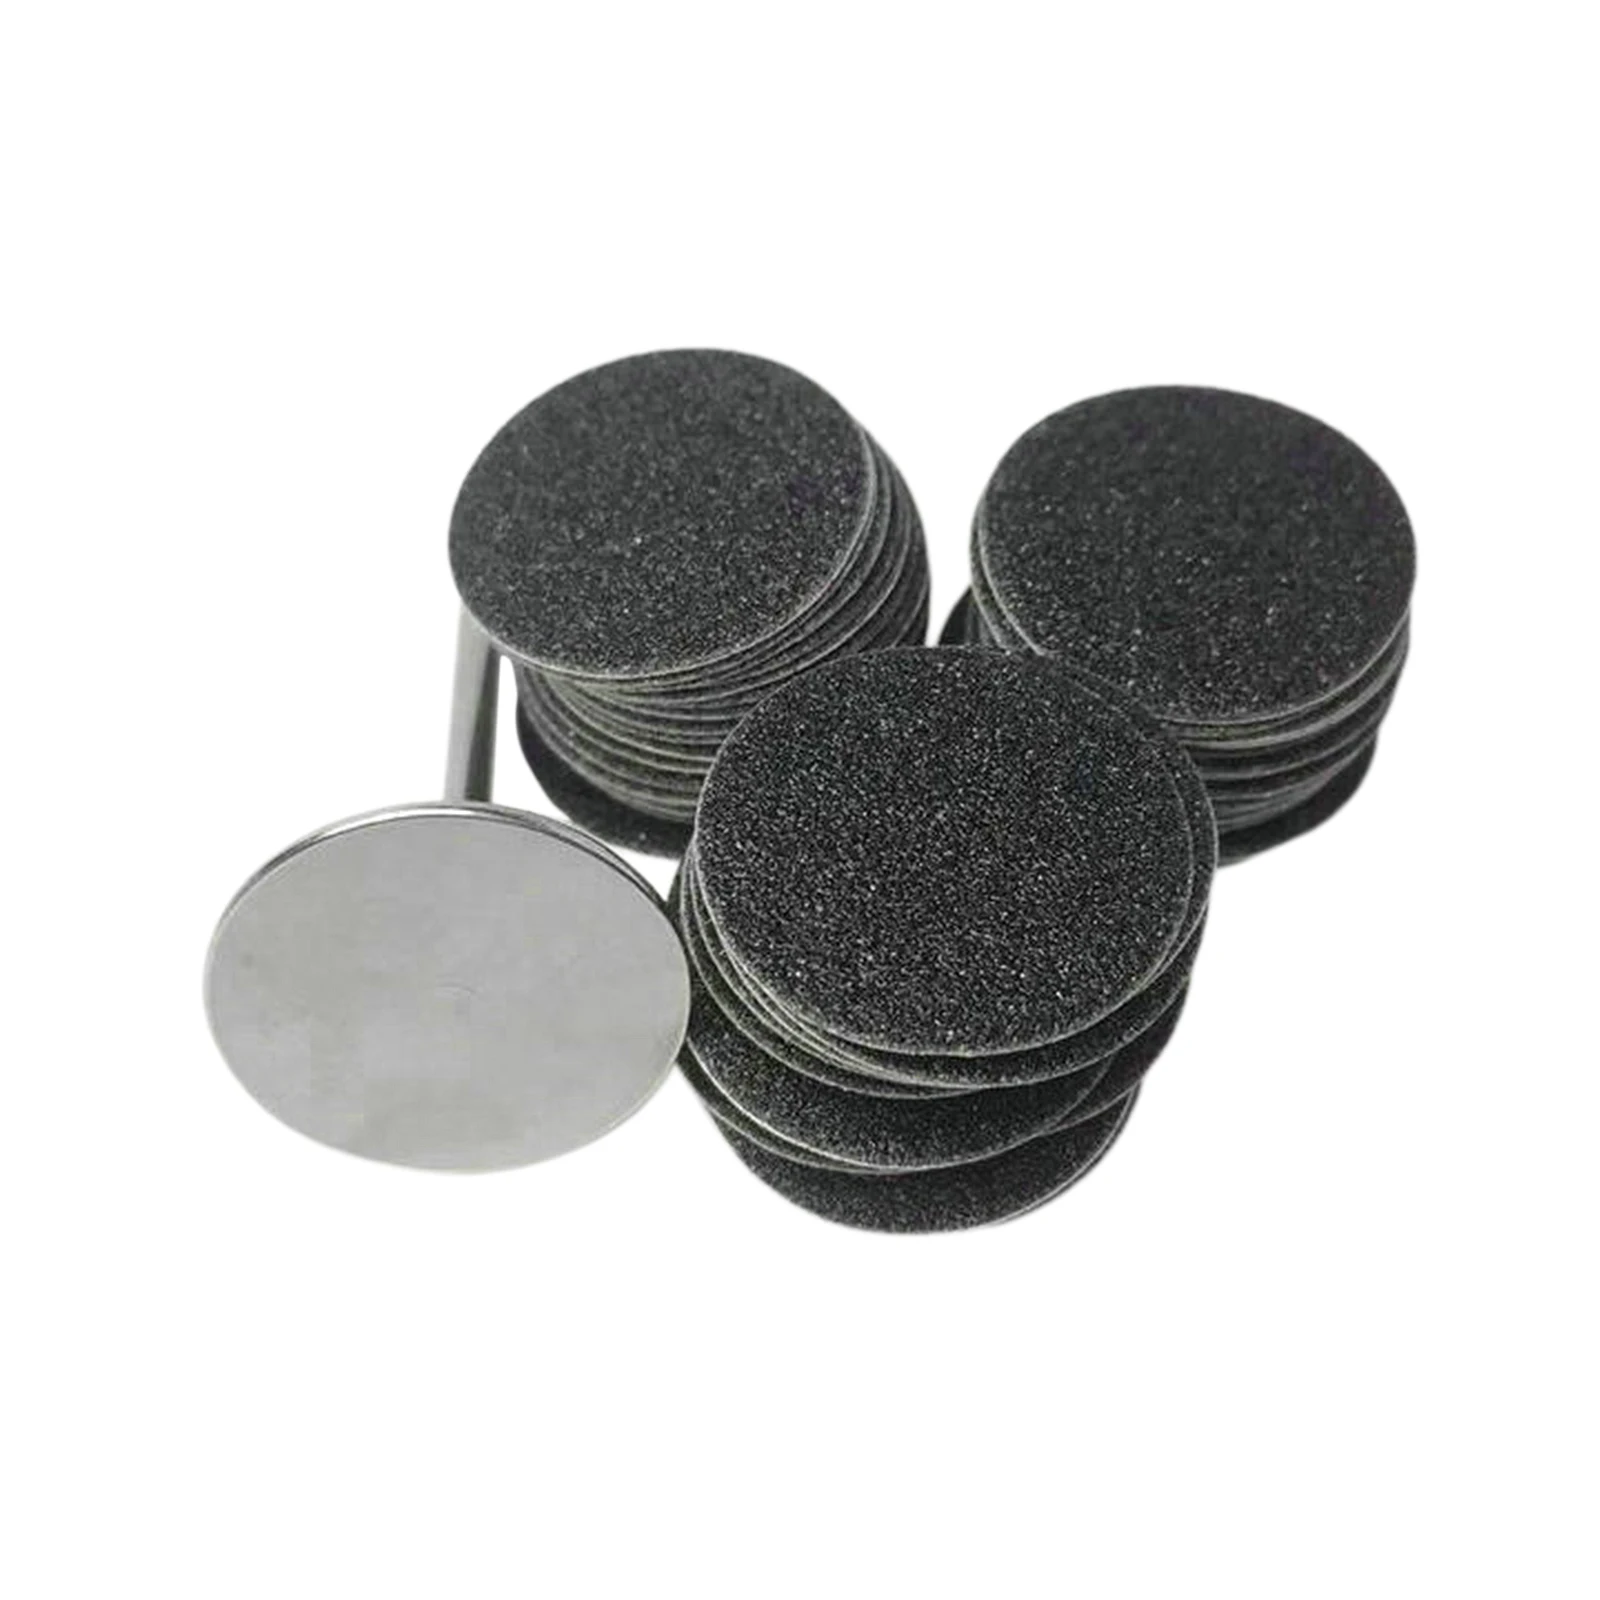 Replacement Sandpaper Discs for Polishing Craft or Electric Callus Remover Pedicure Tool